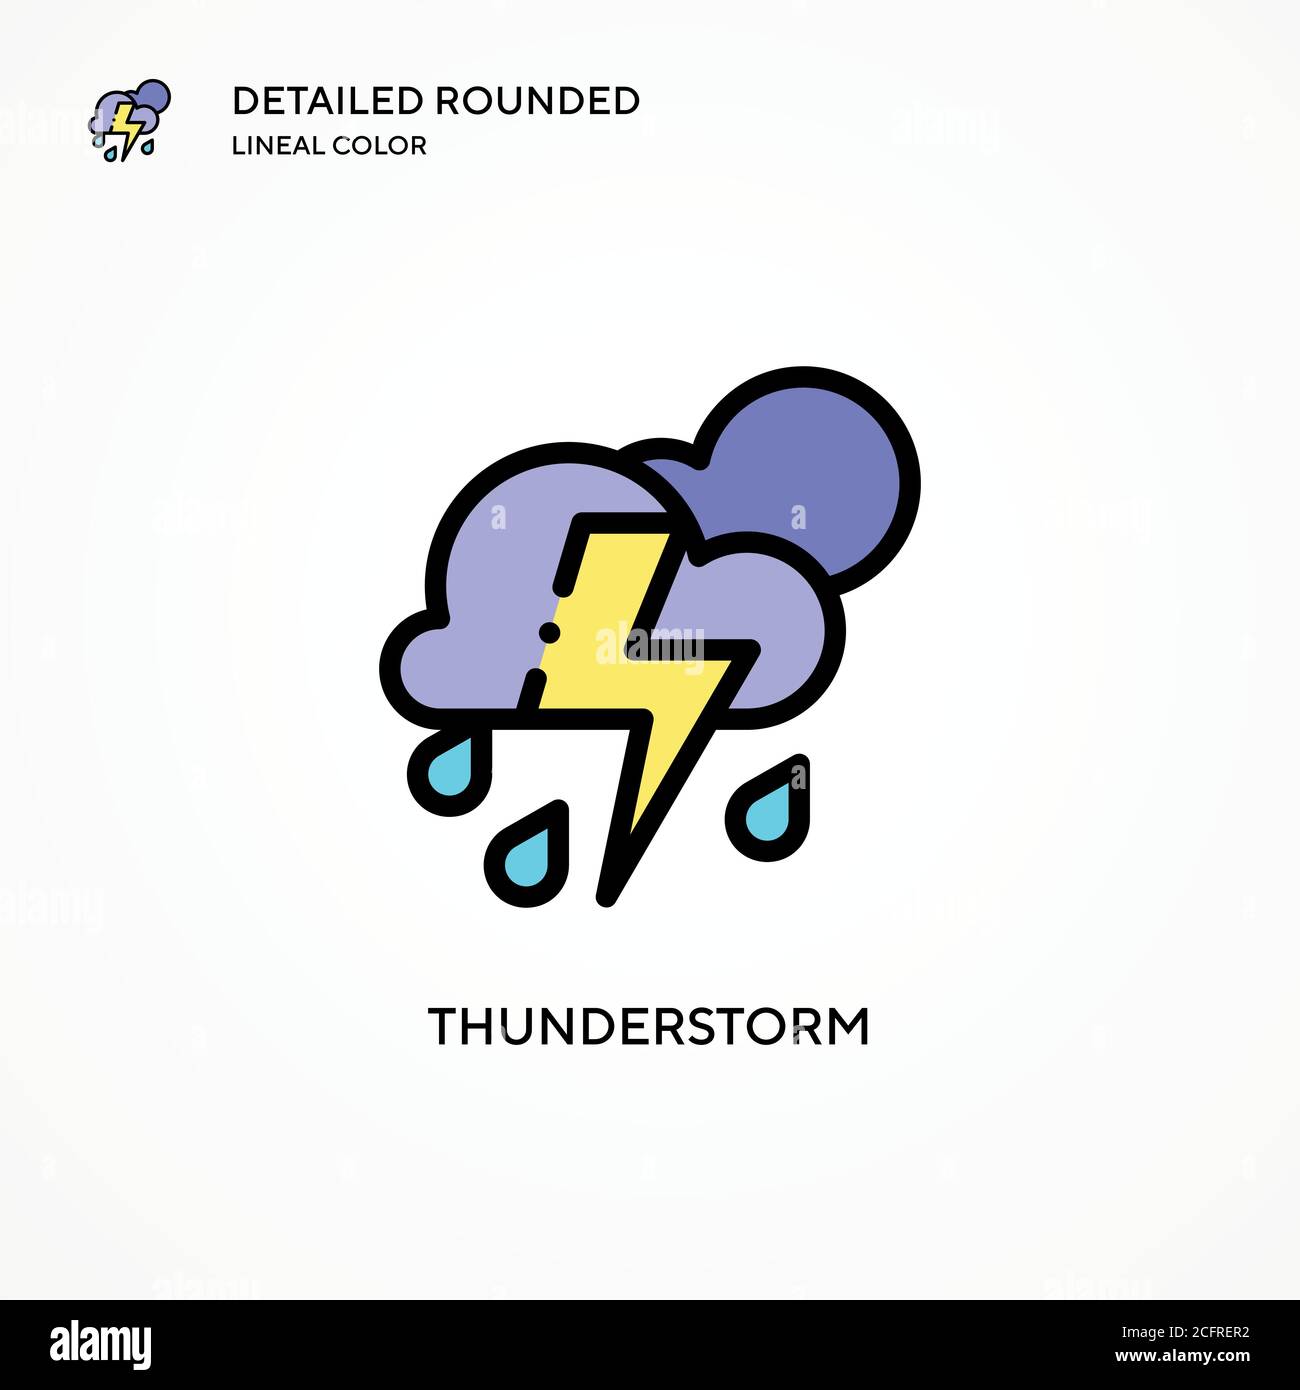 Thunderstorm vector icon. Modern vector illustration concepts. Easy to edit and customize. Stock Vector